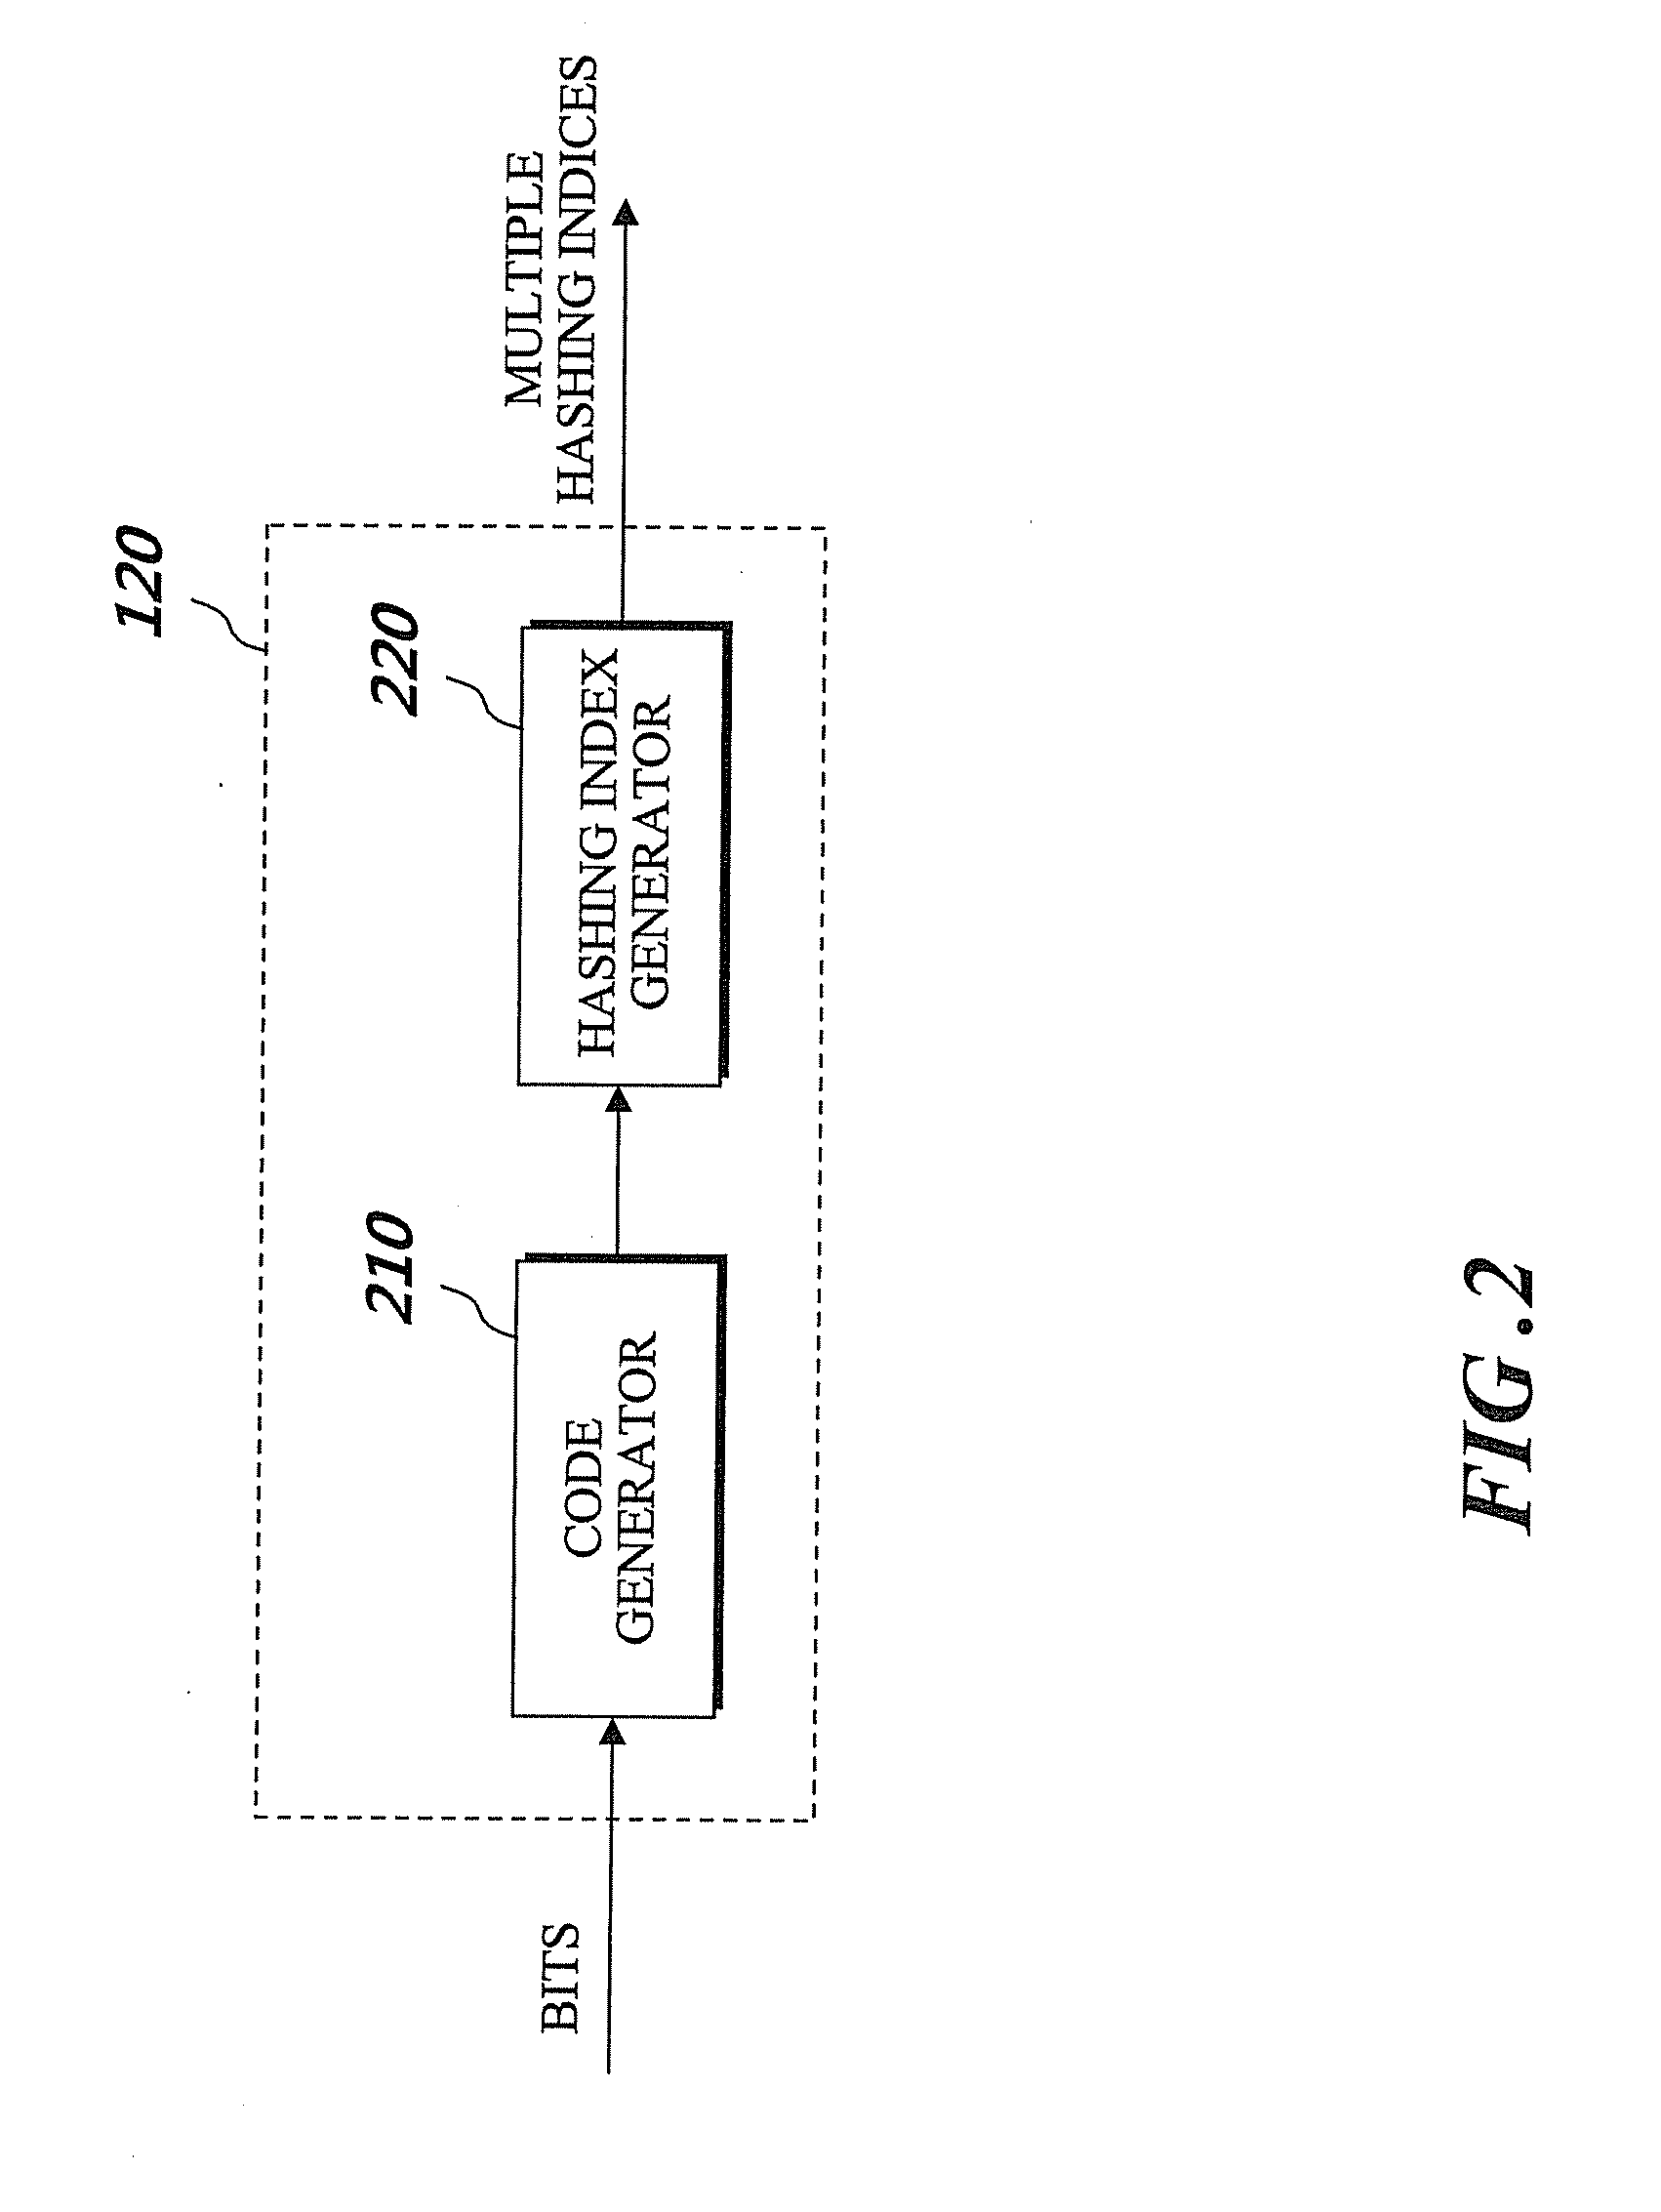 Method and apparatus for searching IP address